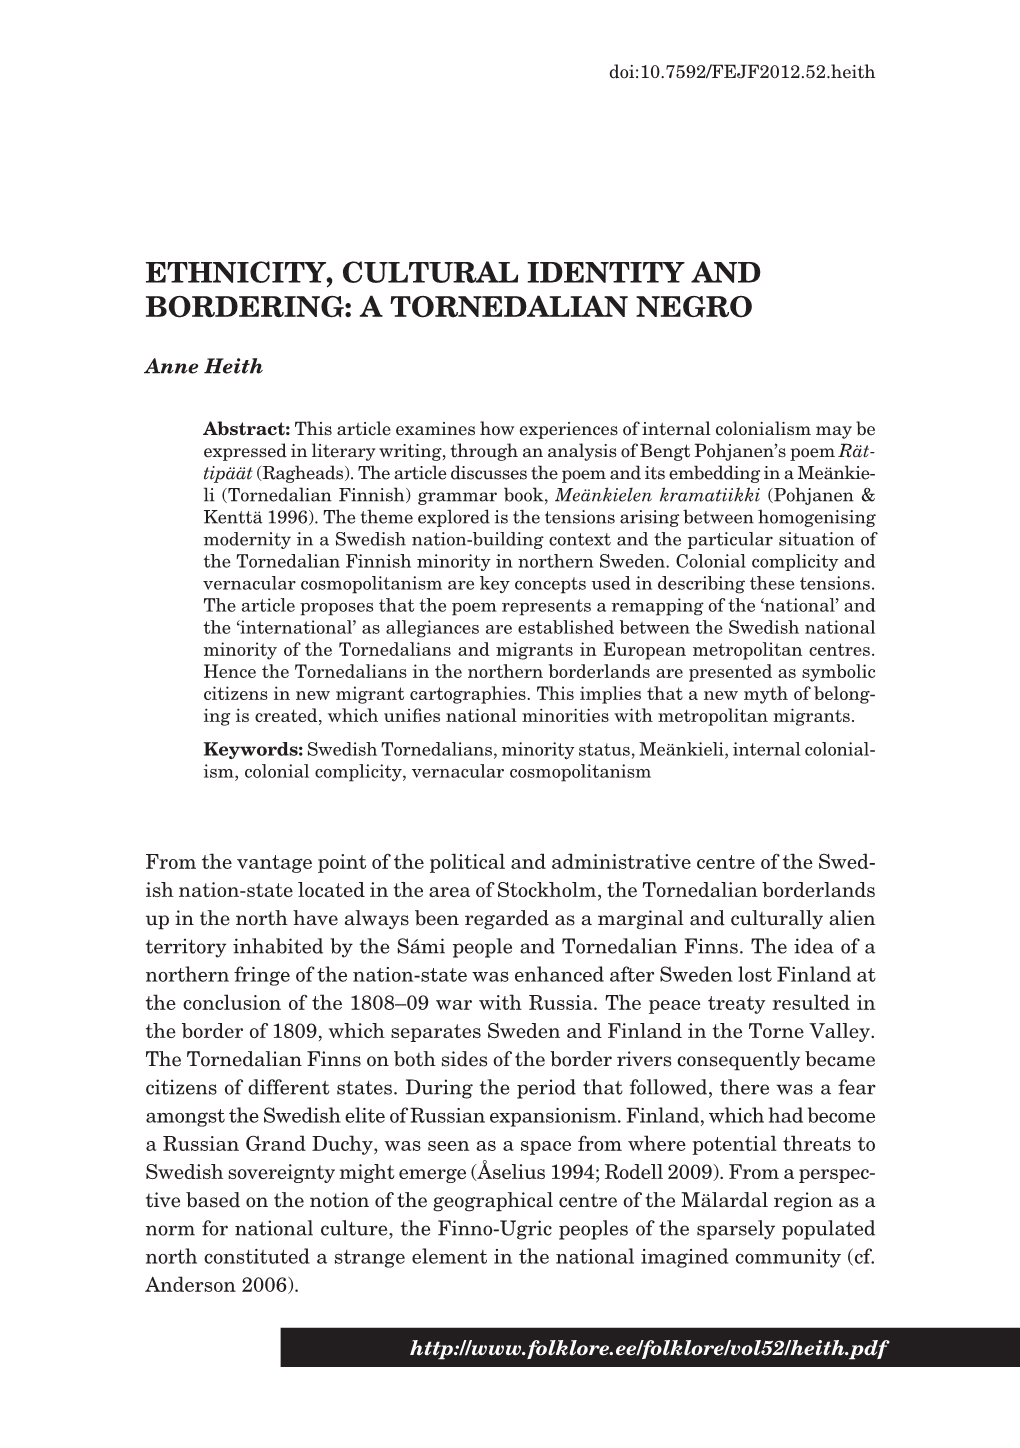 Ethnicity, Cultural Identity and Bordering: a Tornedalian Negro